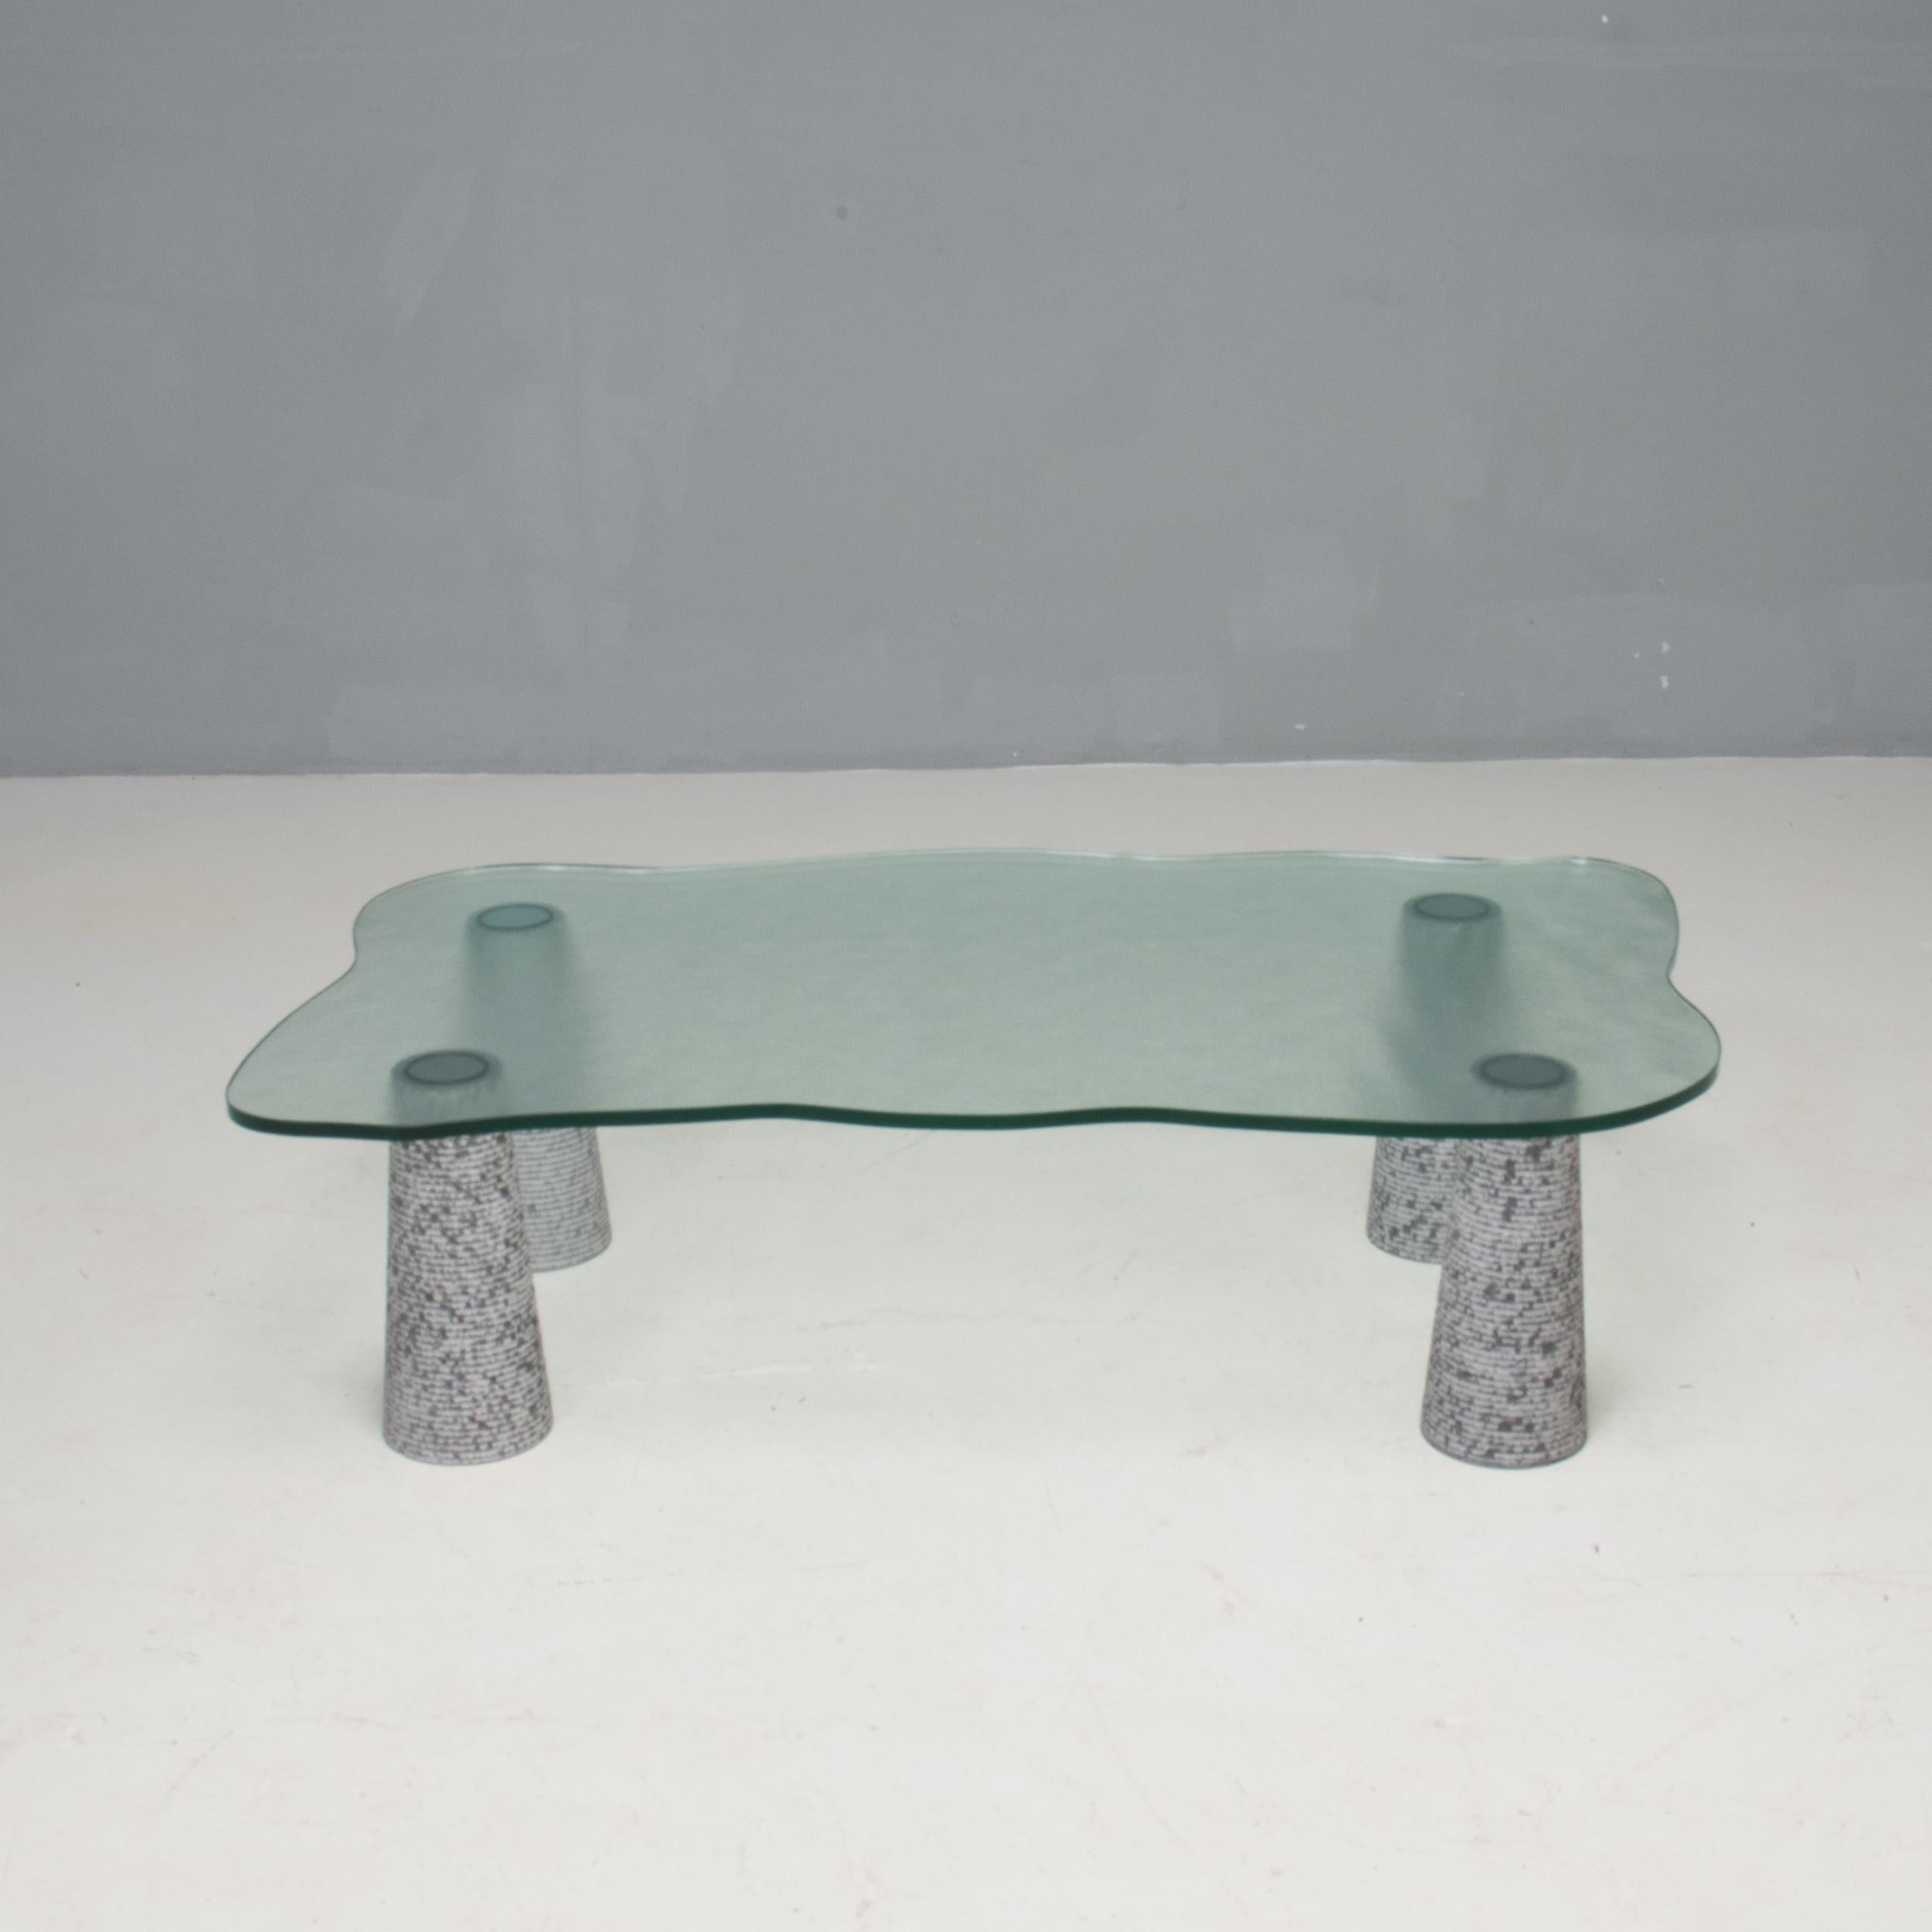 Brutalist Italian Casigliani Grey Marble & Textured Glass Coffee Table, 1980s For Sale 2